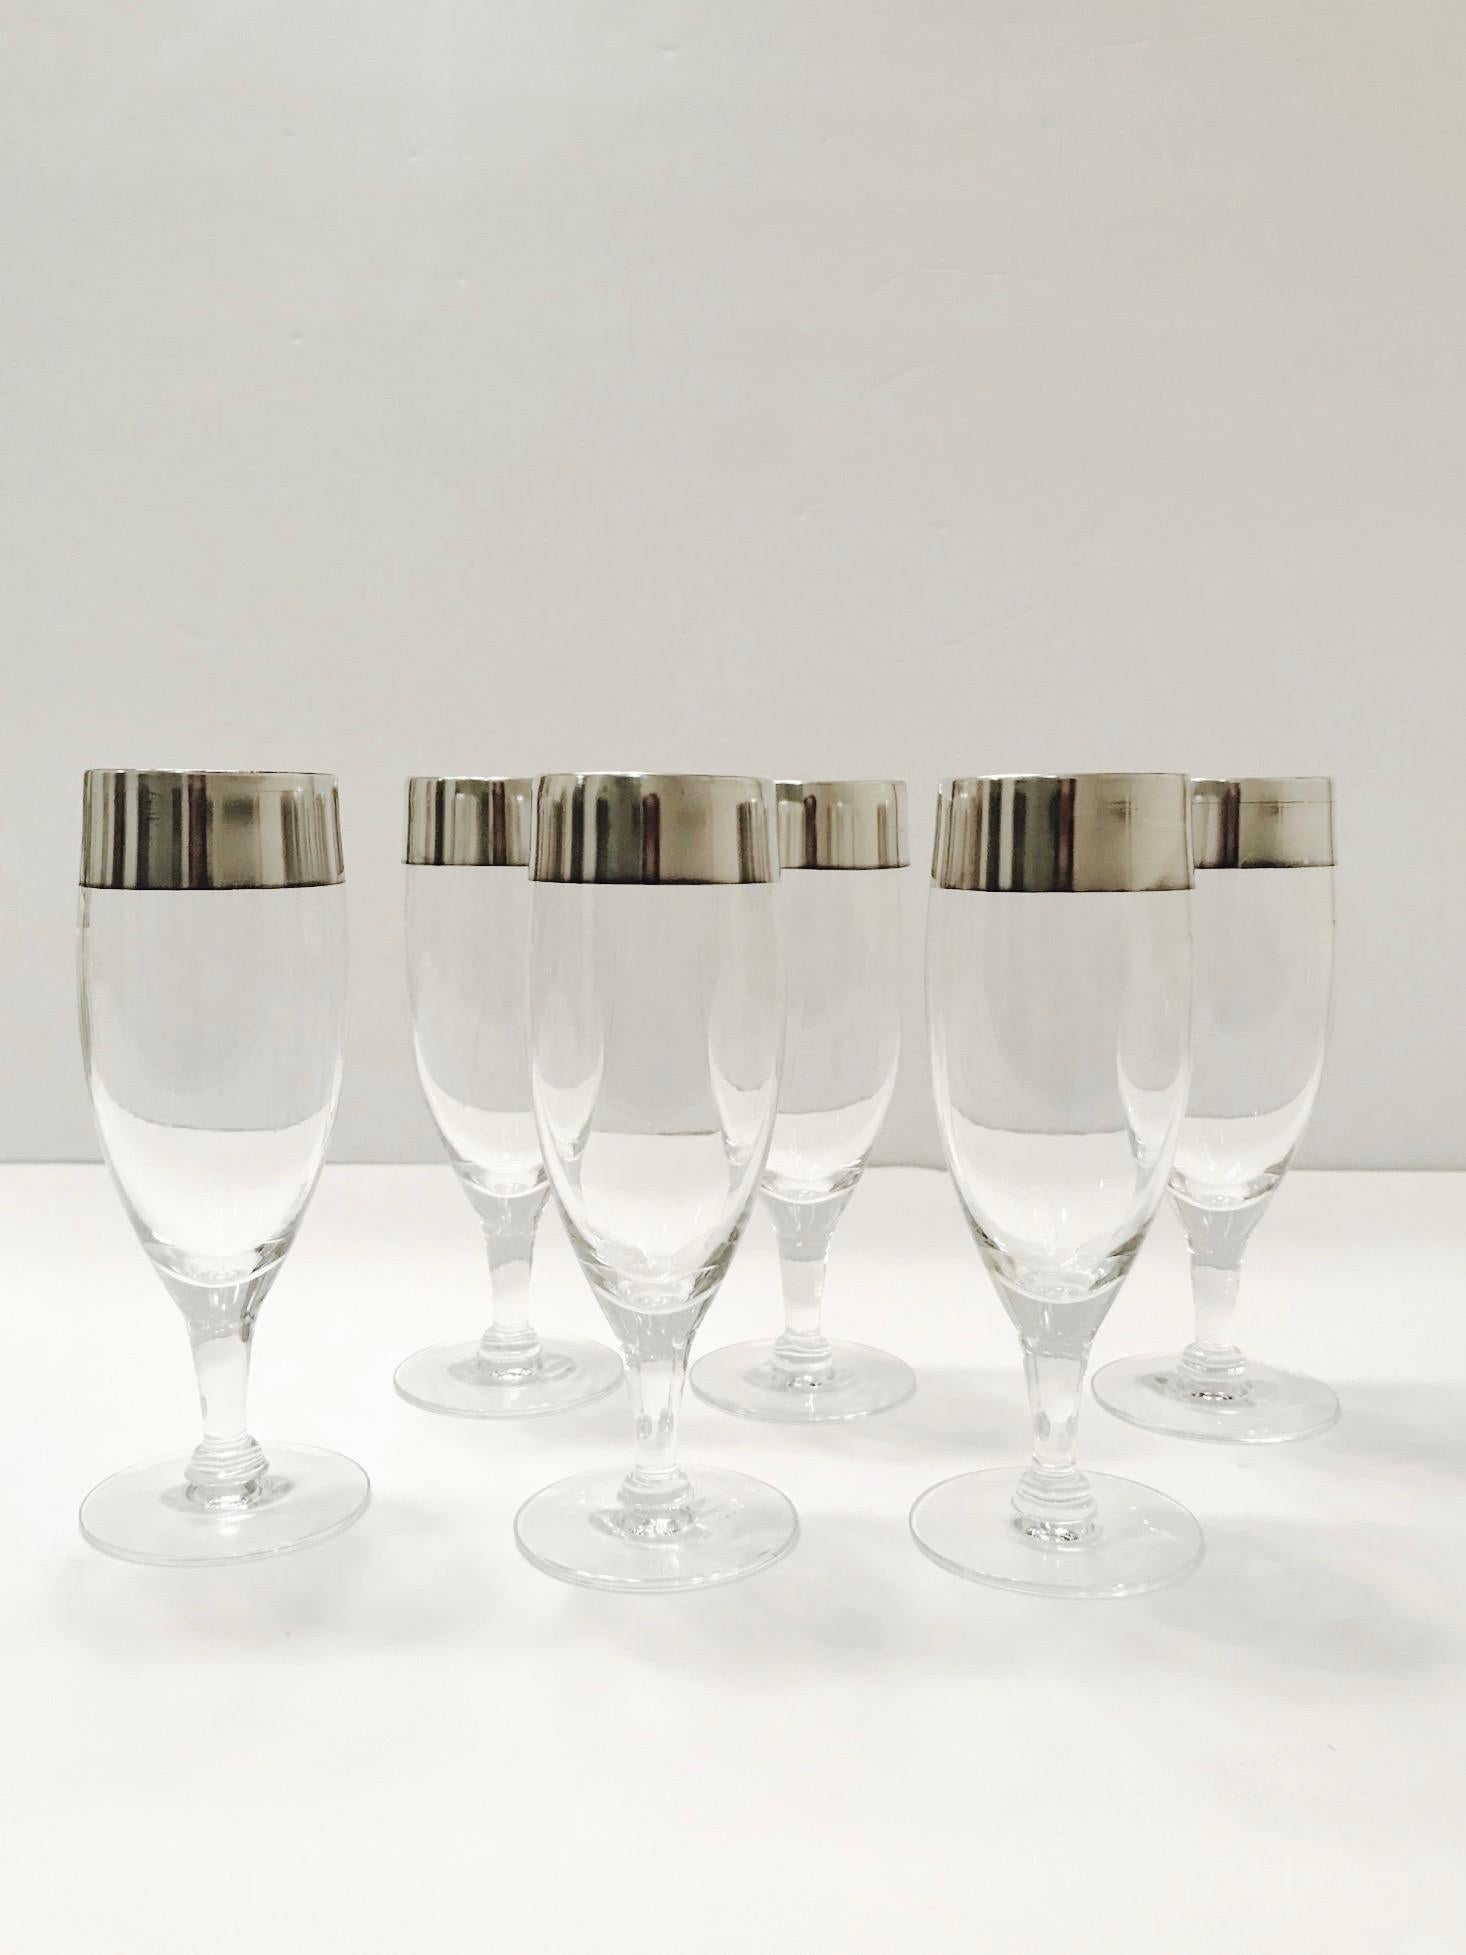 Set of six elegant Mid-Century Modern stemware glasses designed by Dorothy Thorpe. The rare champagne glasses feature short stems with the iconic sterling silver rims for which Thorpe is recognized and highly sought after. These make an excellent